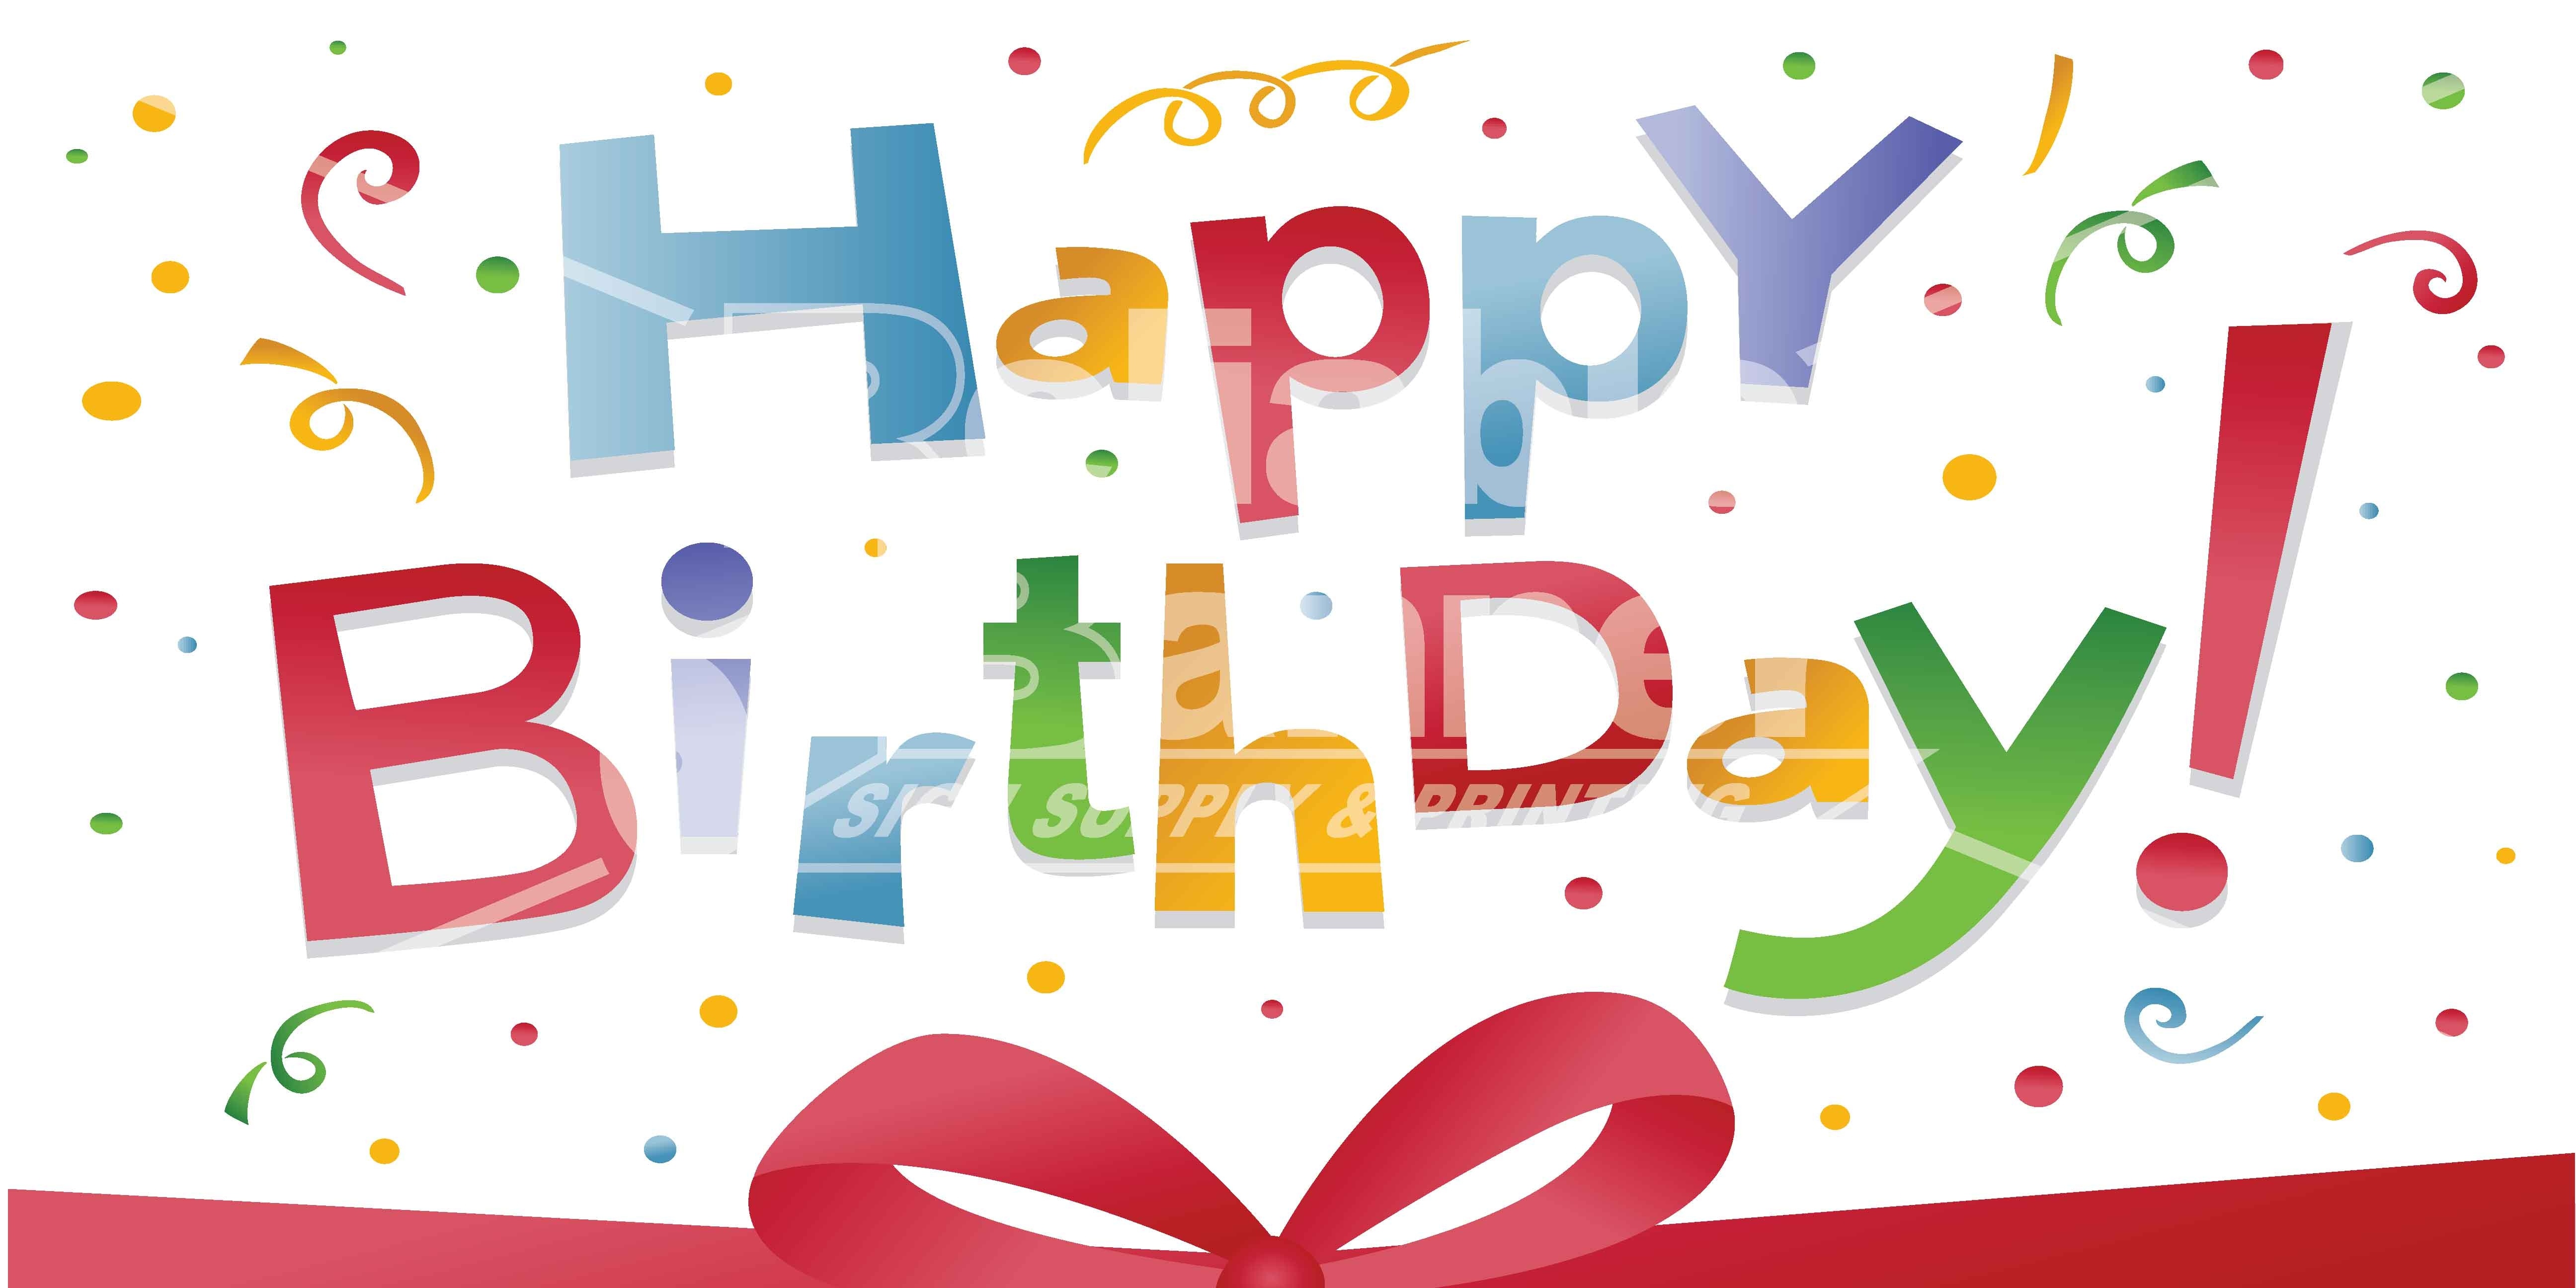 Free Happy Birthday Sign, Download Free Clip Art, Free Clip Art On - Free Printable Happy Birthday Signs